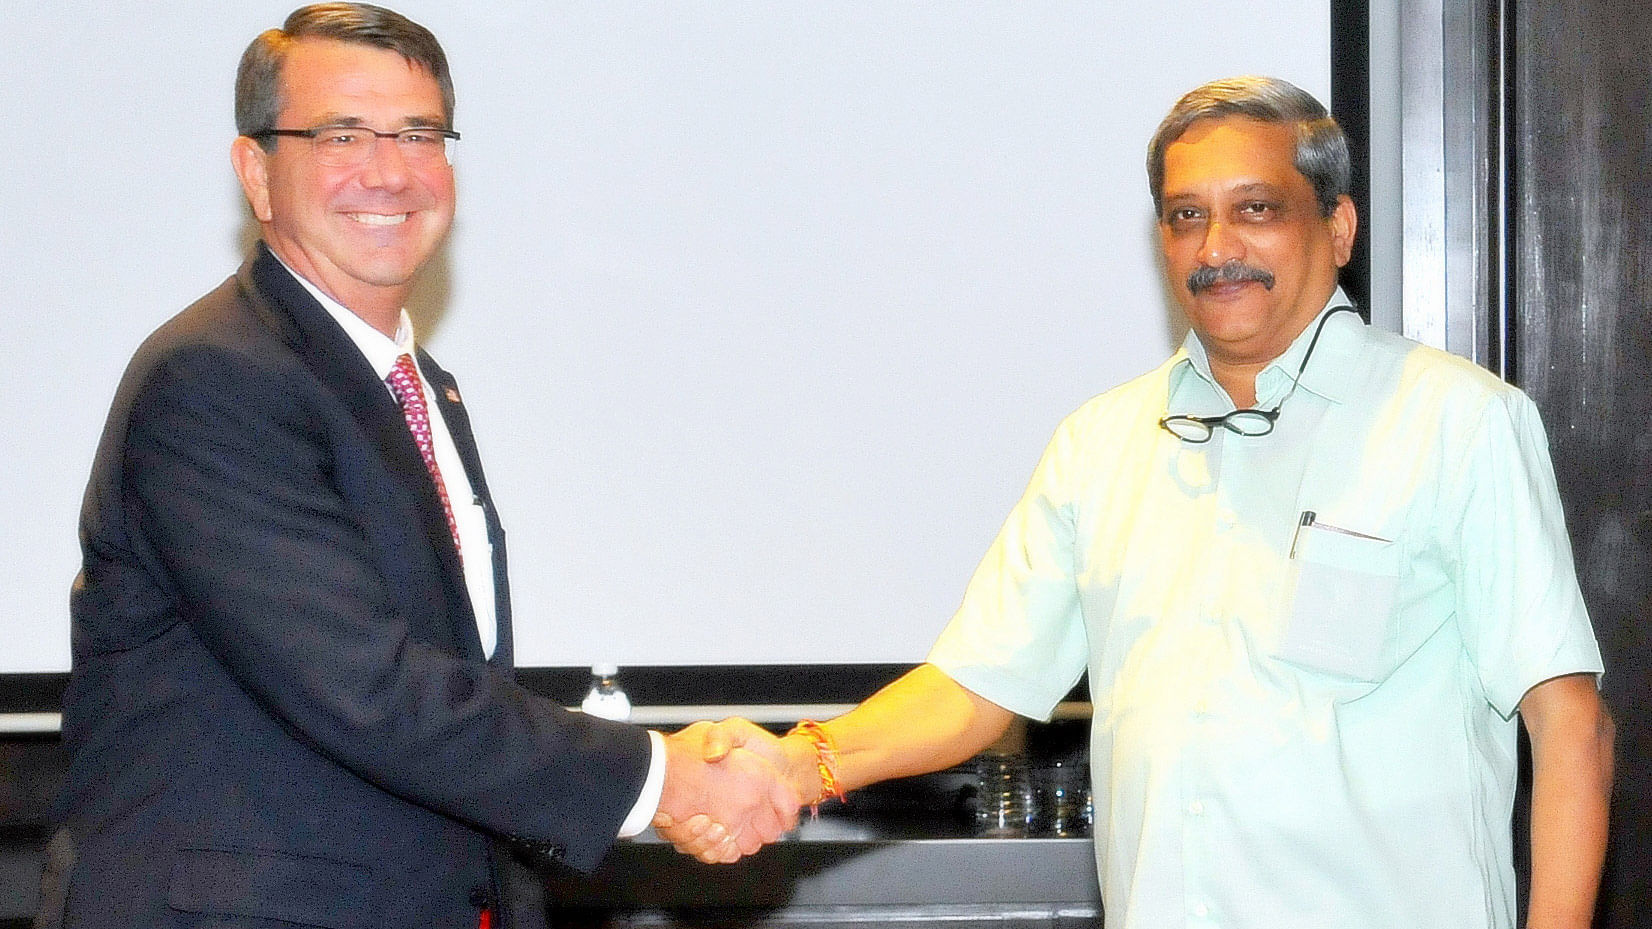 

Union Minister for Defence Manohar Parrikar with US Secretary of Defence  Ashton Carter during the 3rd ASEAN Defence Ministers’ Meeting in Kuala Lumpur, Malaysia on 3 November 2015. (Photo: IANS)